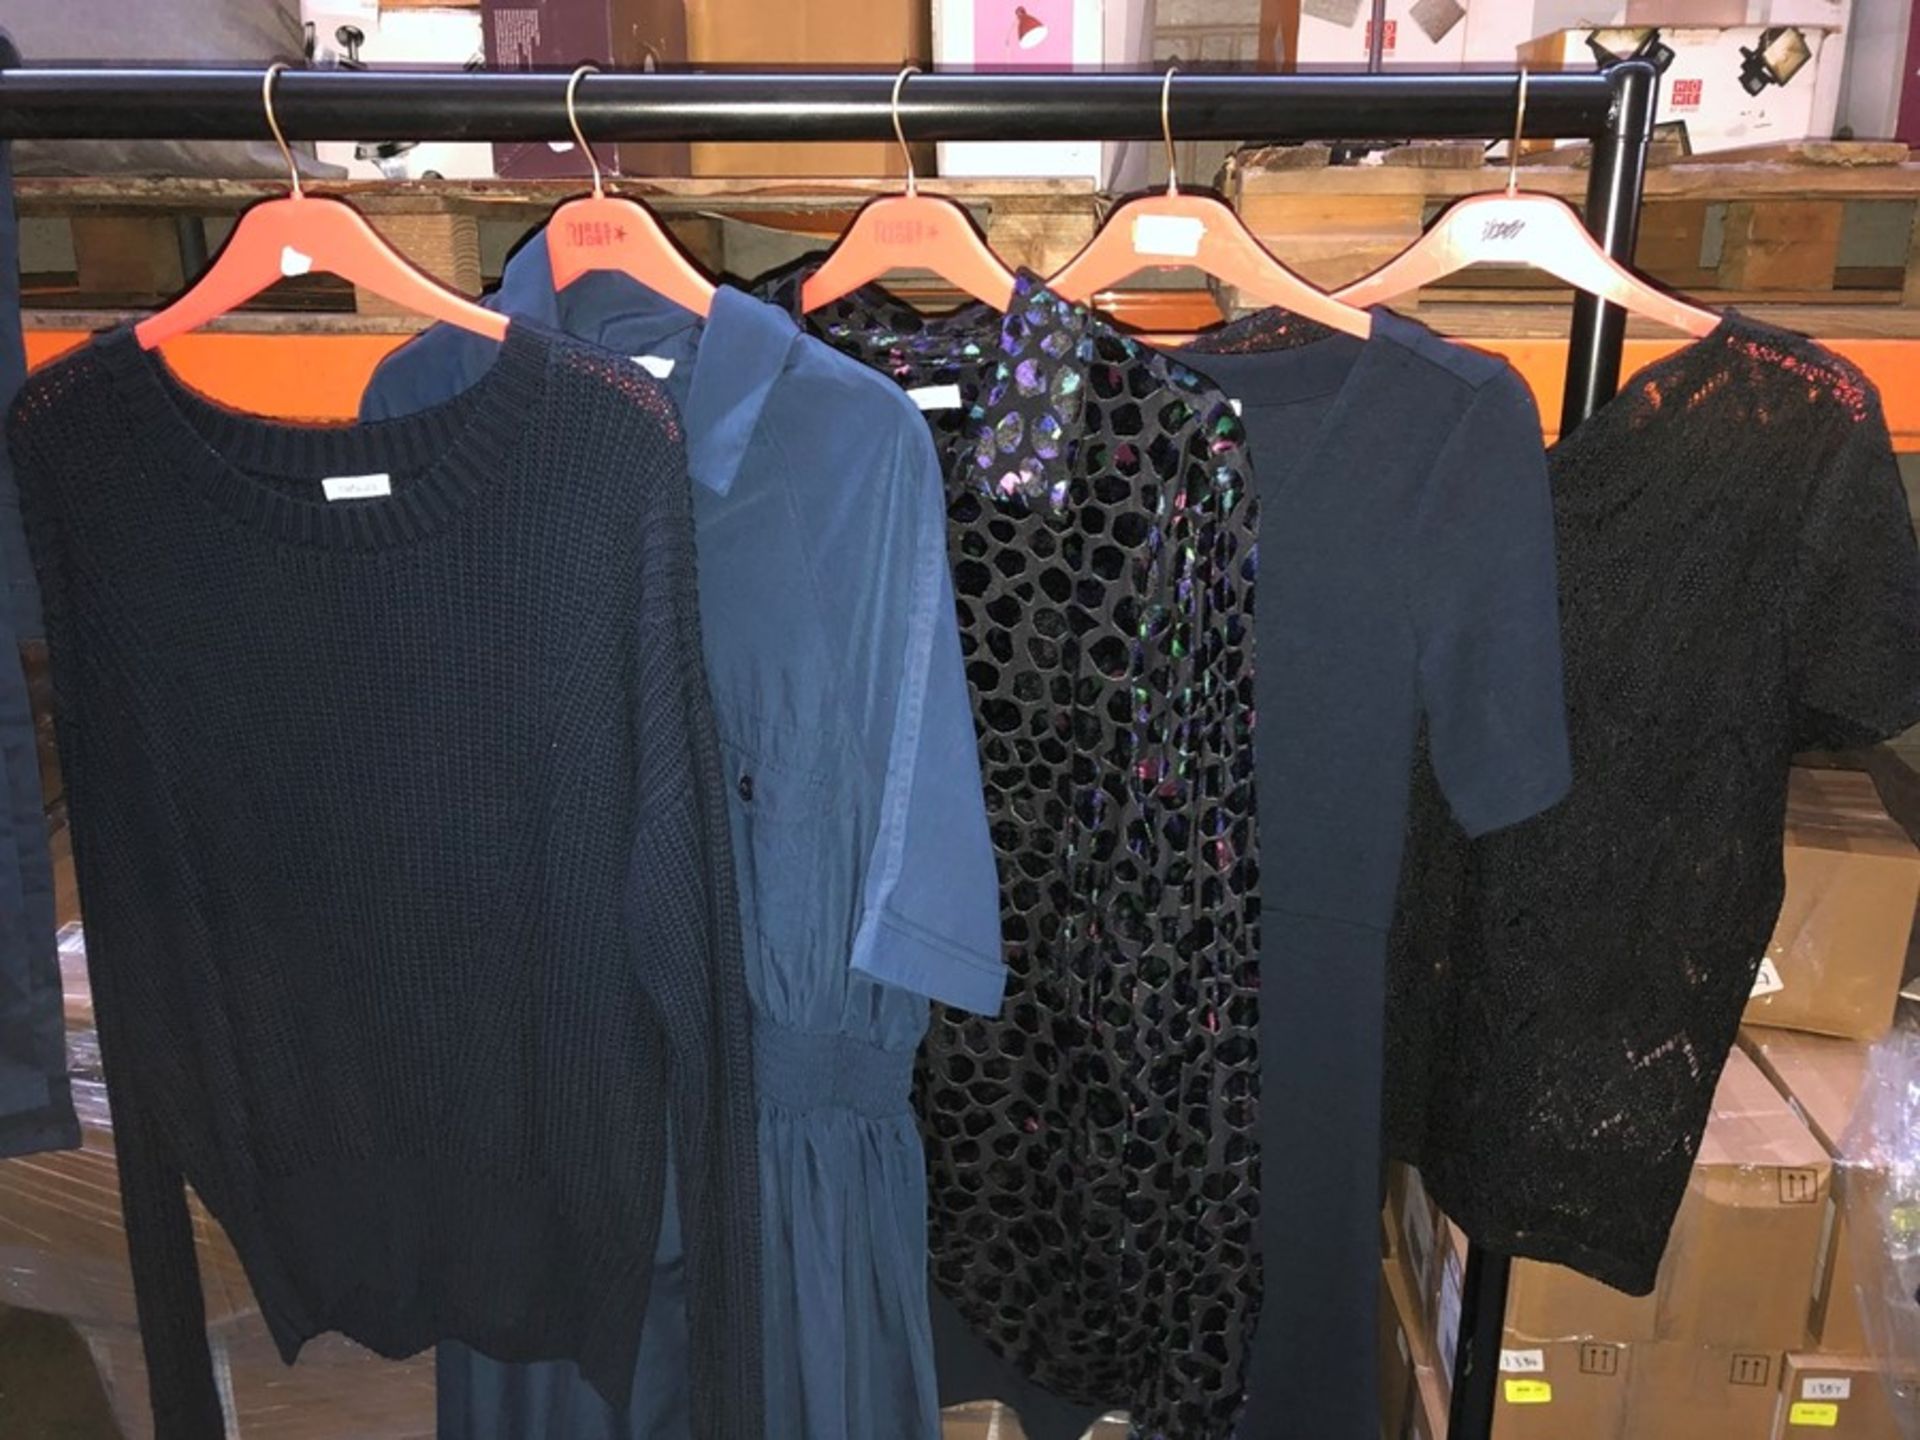 1 LOT TO CONTAIN 5 ITEMS OF WOMENS BRAND NAME DESIGNER CLOTHING / UK SIZES LEFT TO RIGHT 14,18,24,